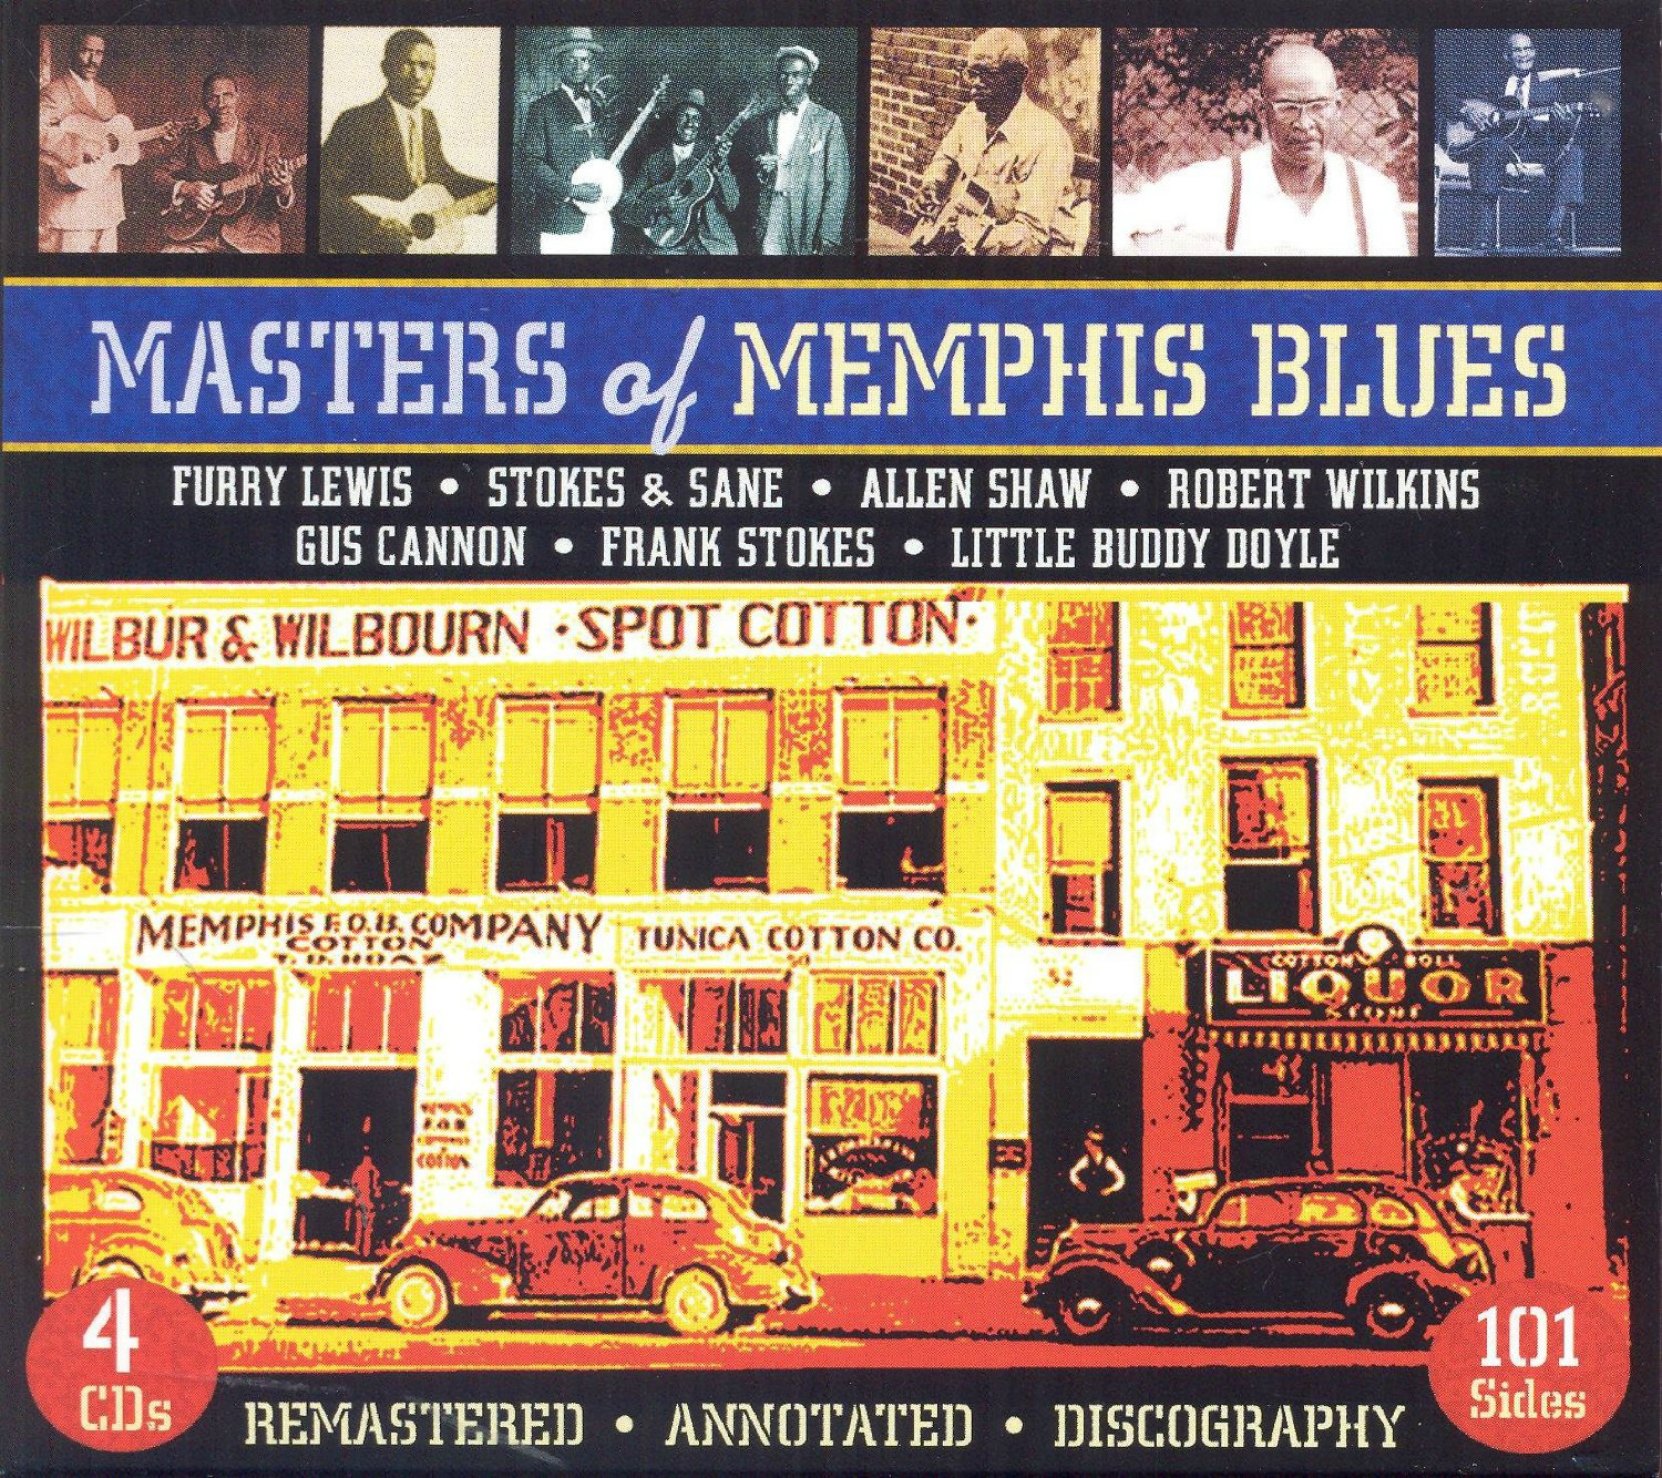 Masters of Memphis Blues, on JSP Records, CD box set cover